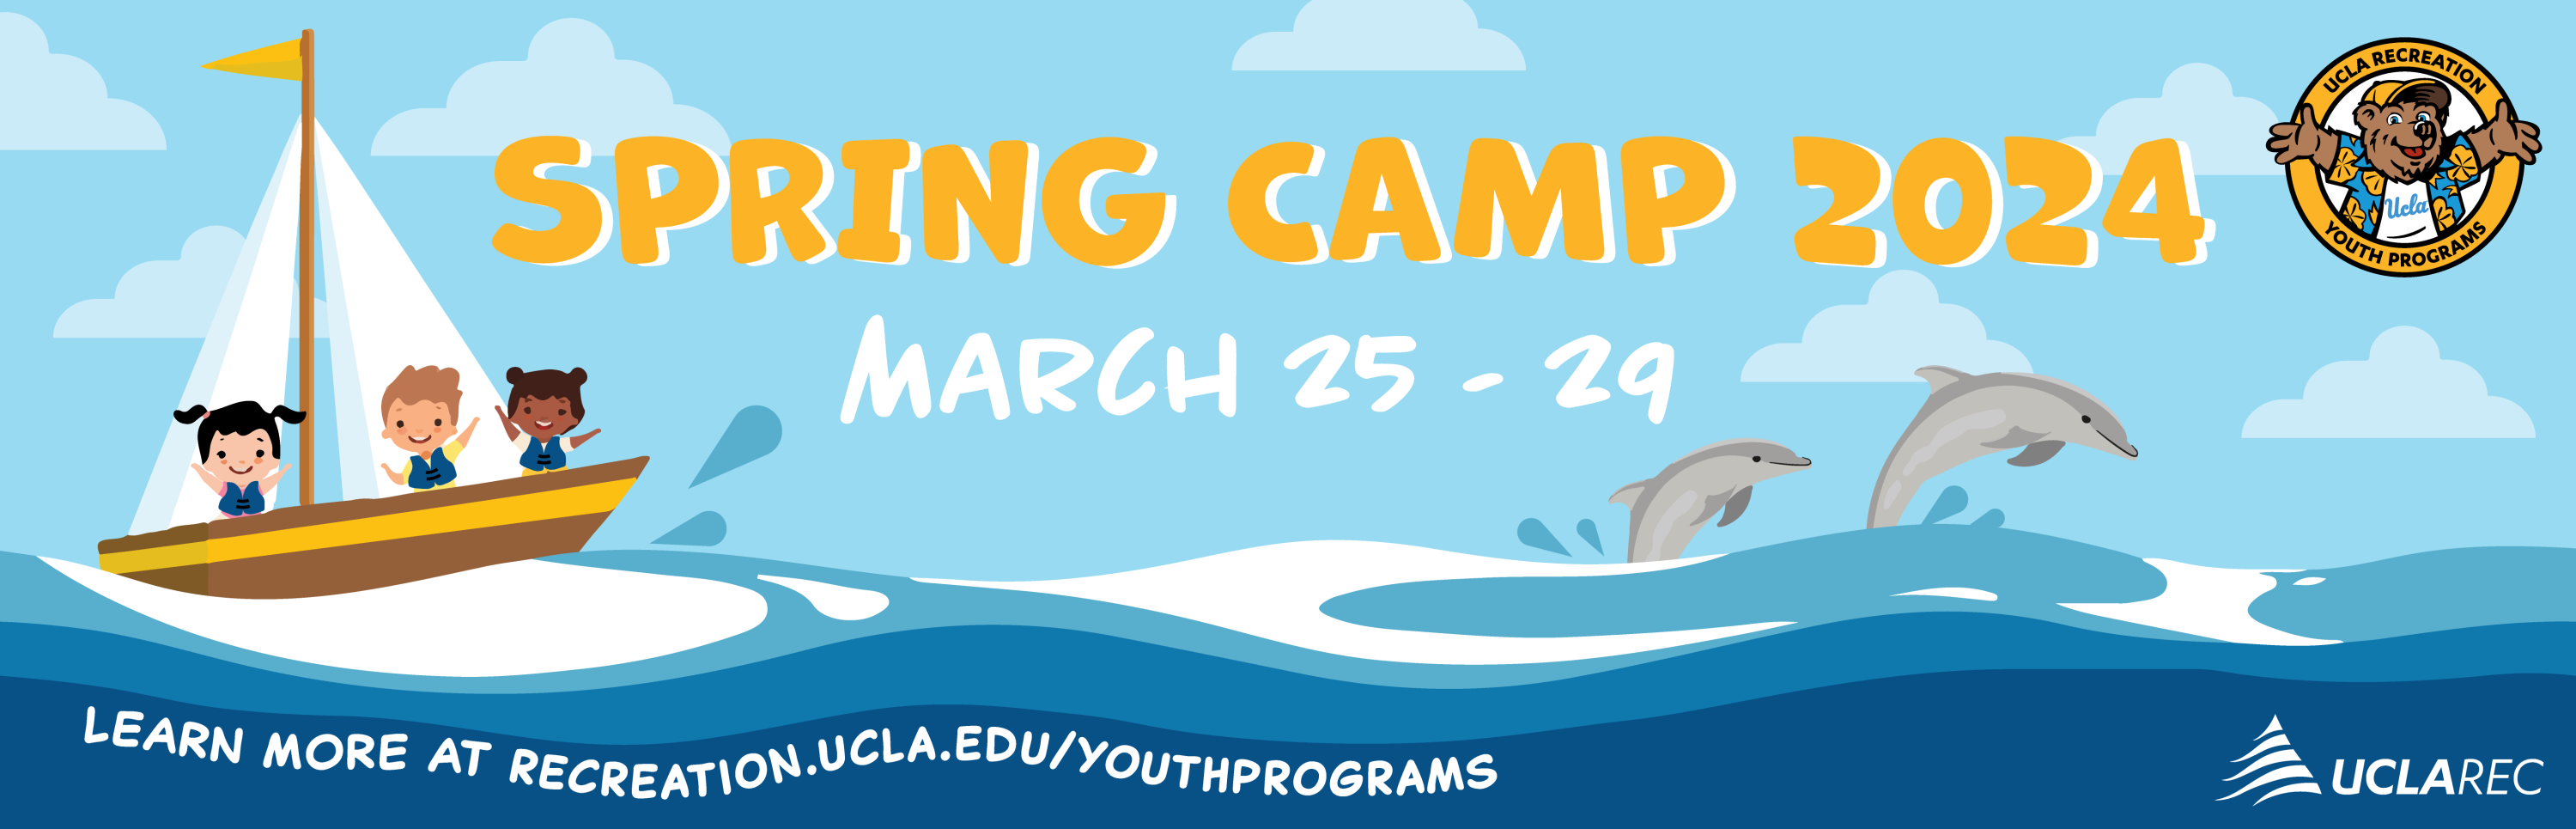 Spring Camp 2024 March 25-29. Graphic of children in a sail boat